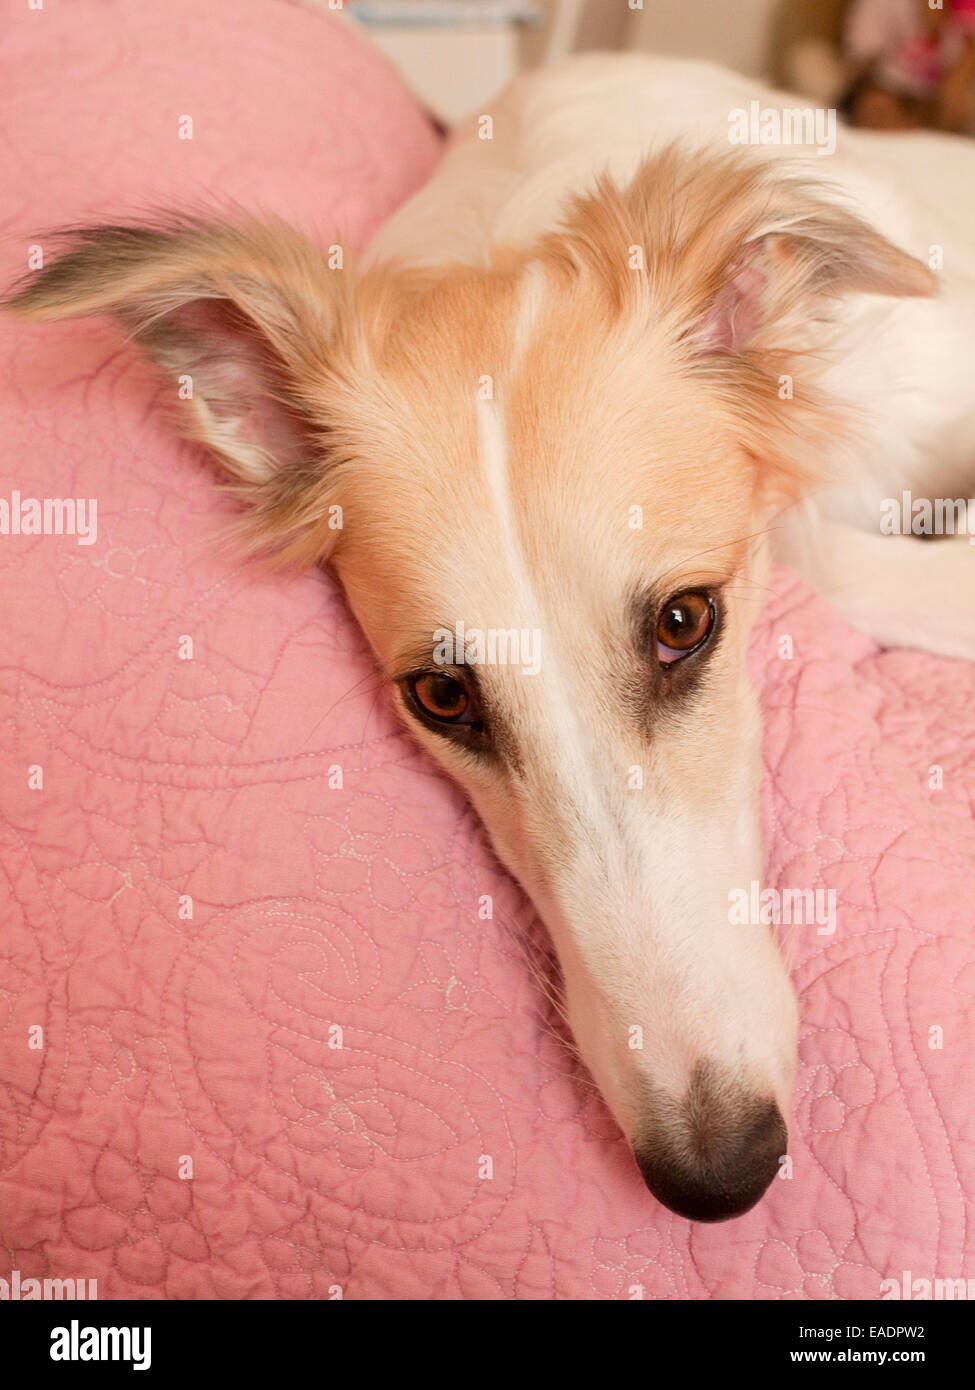 dog resting head on bed Stock Photo